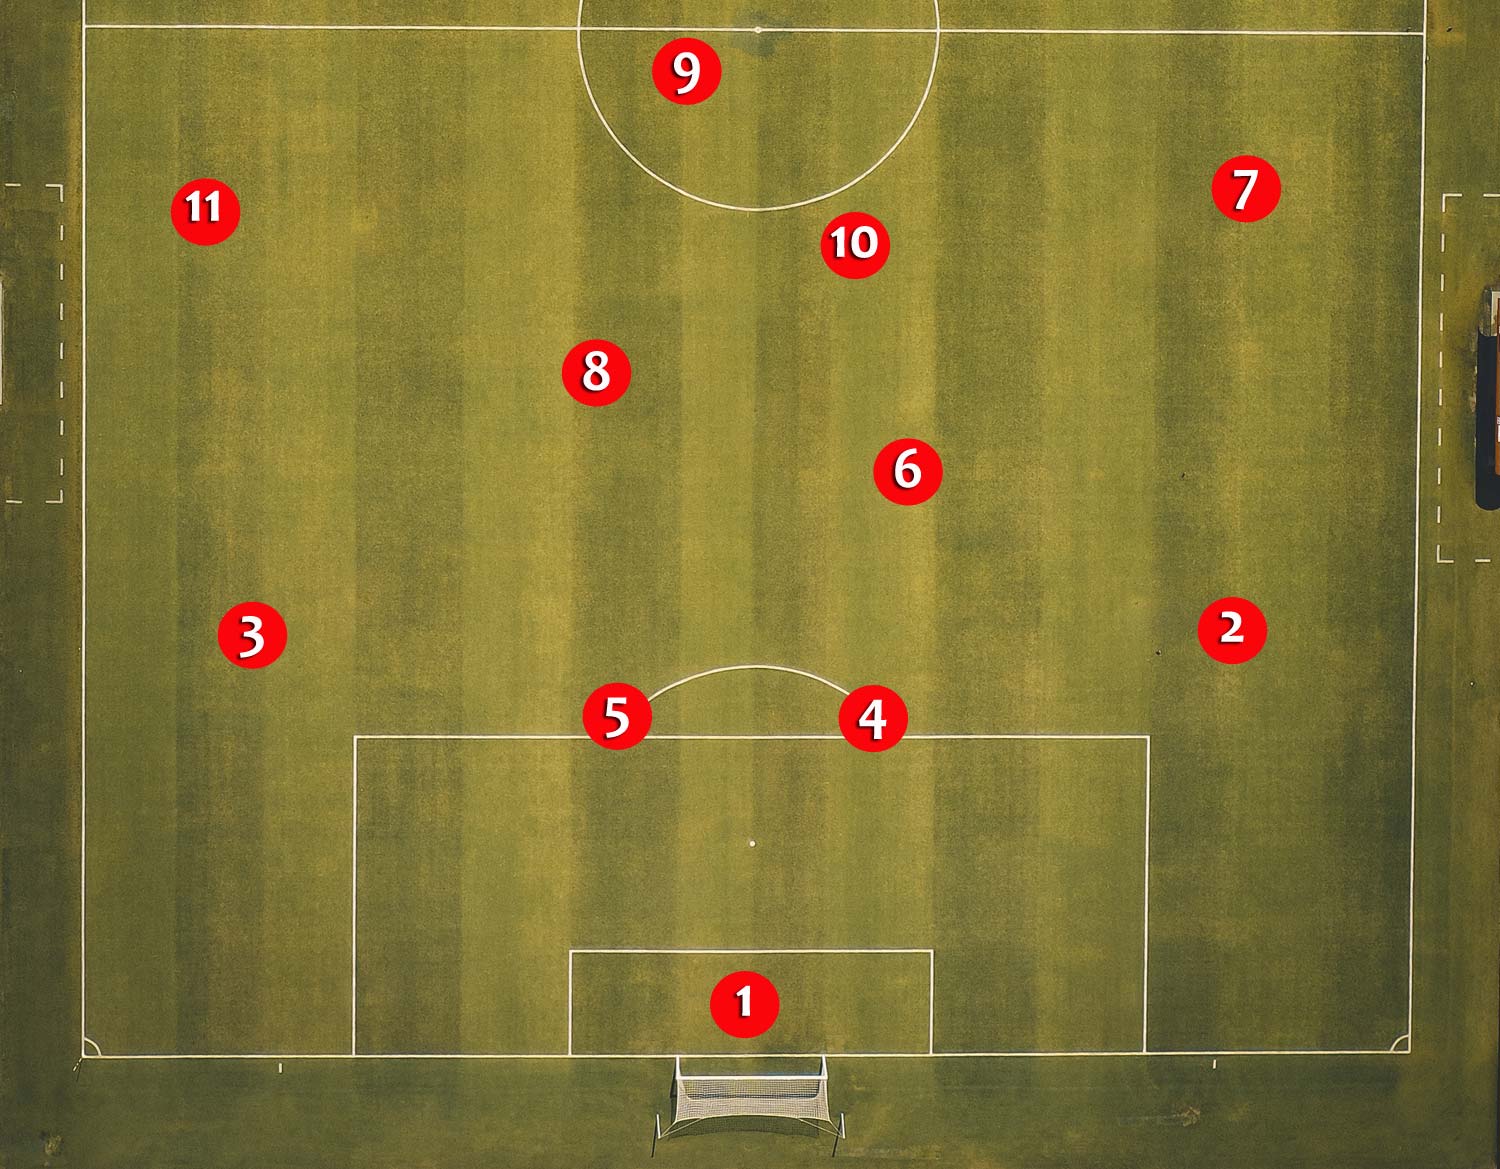 kit numbers to positions soccer